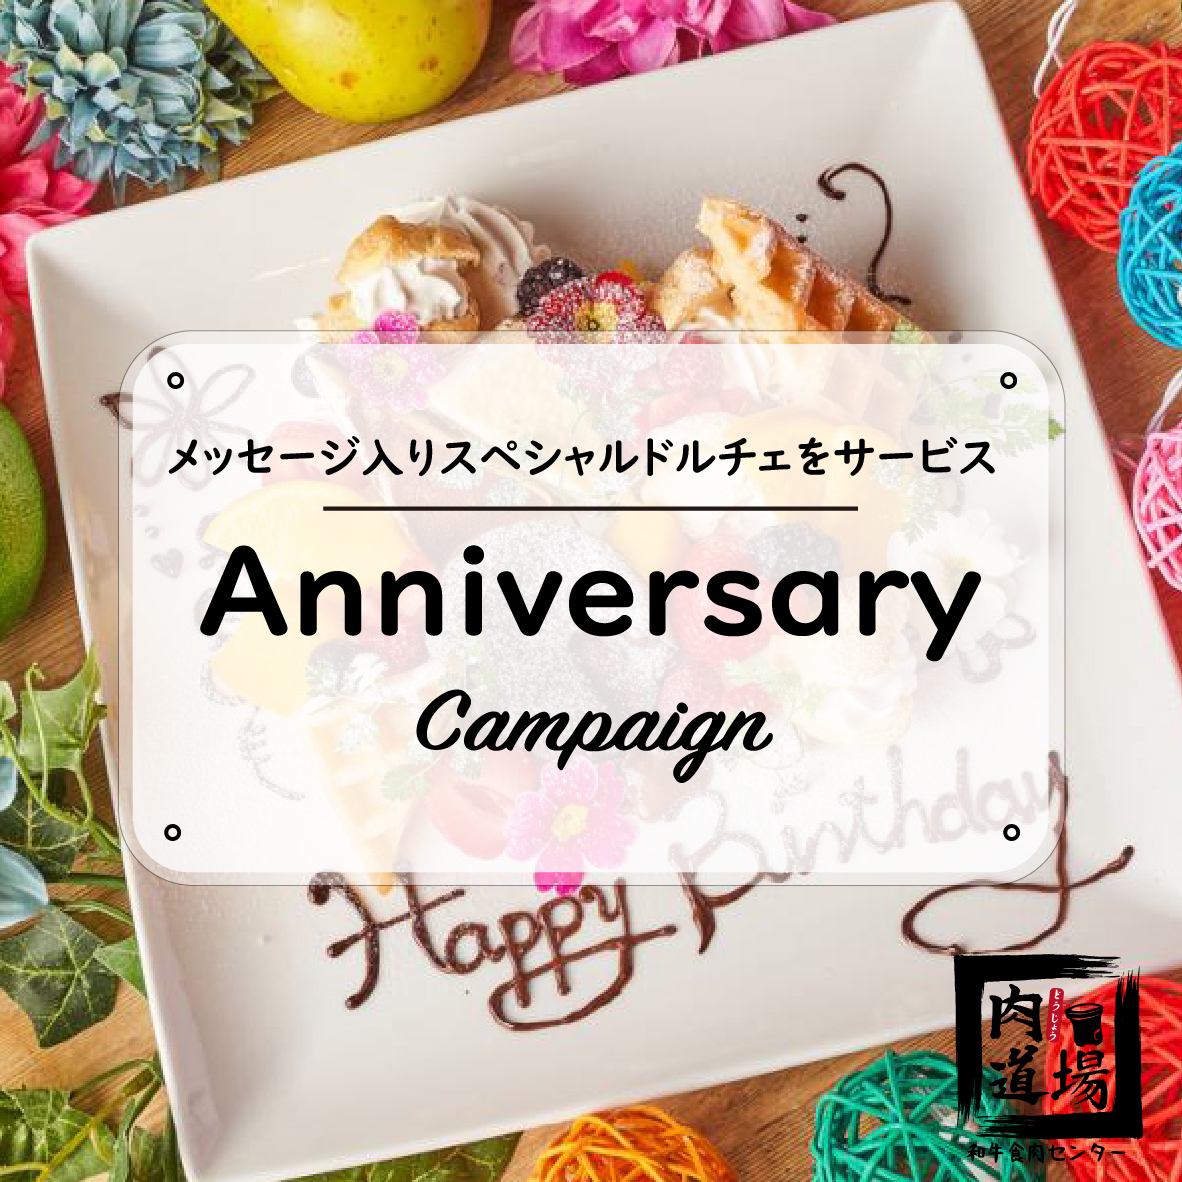 A special dolce with a message will be served on your birthday anniversary★